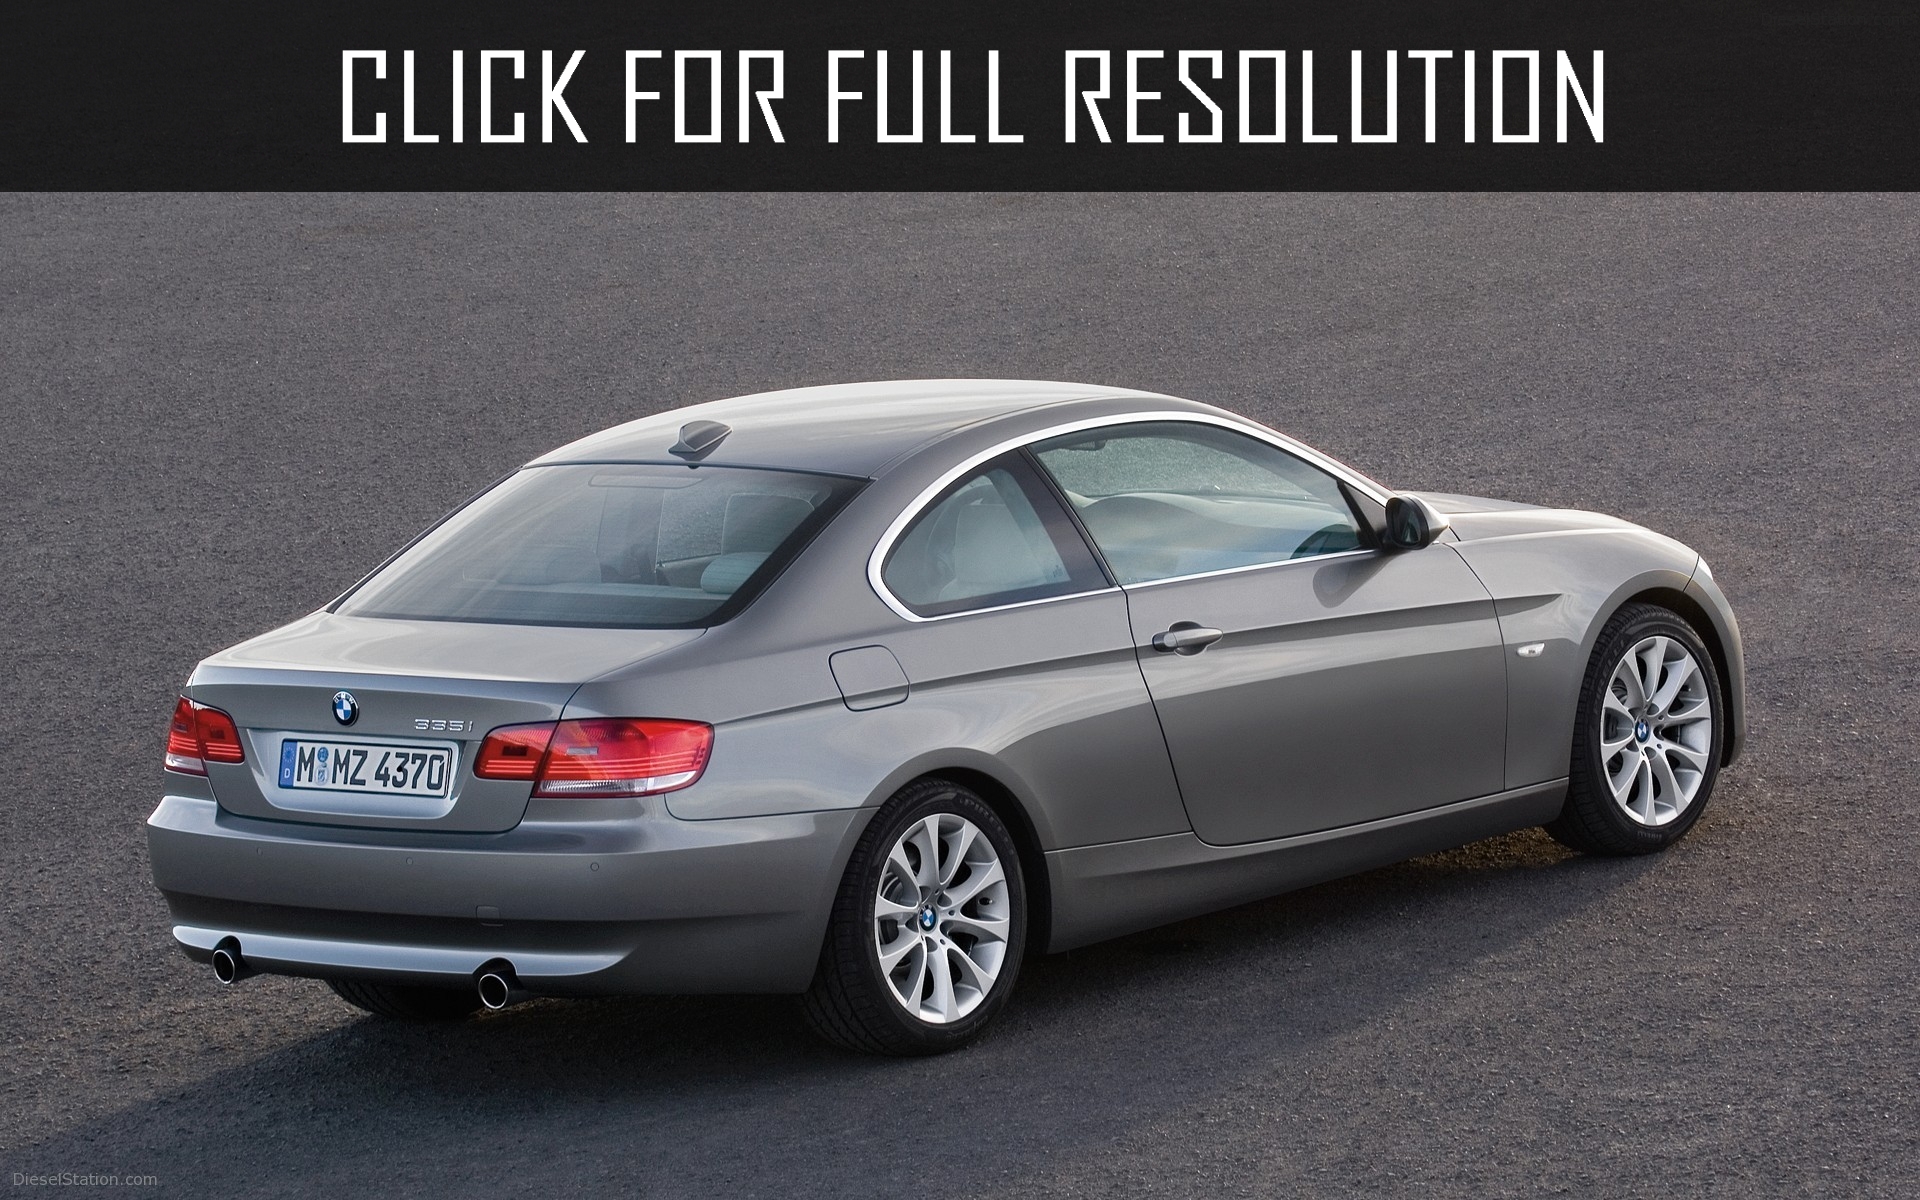 2006 Bmw 3 Series Coupe image gallery #4/18 share and download